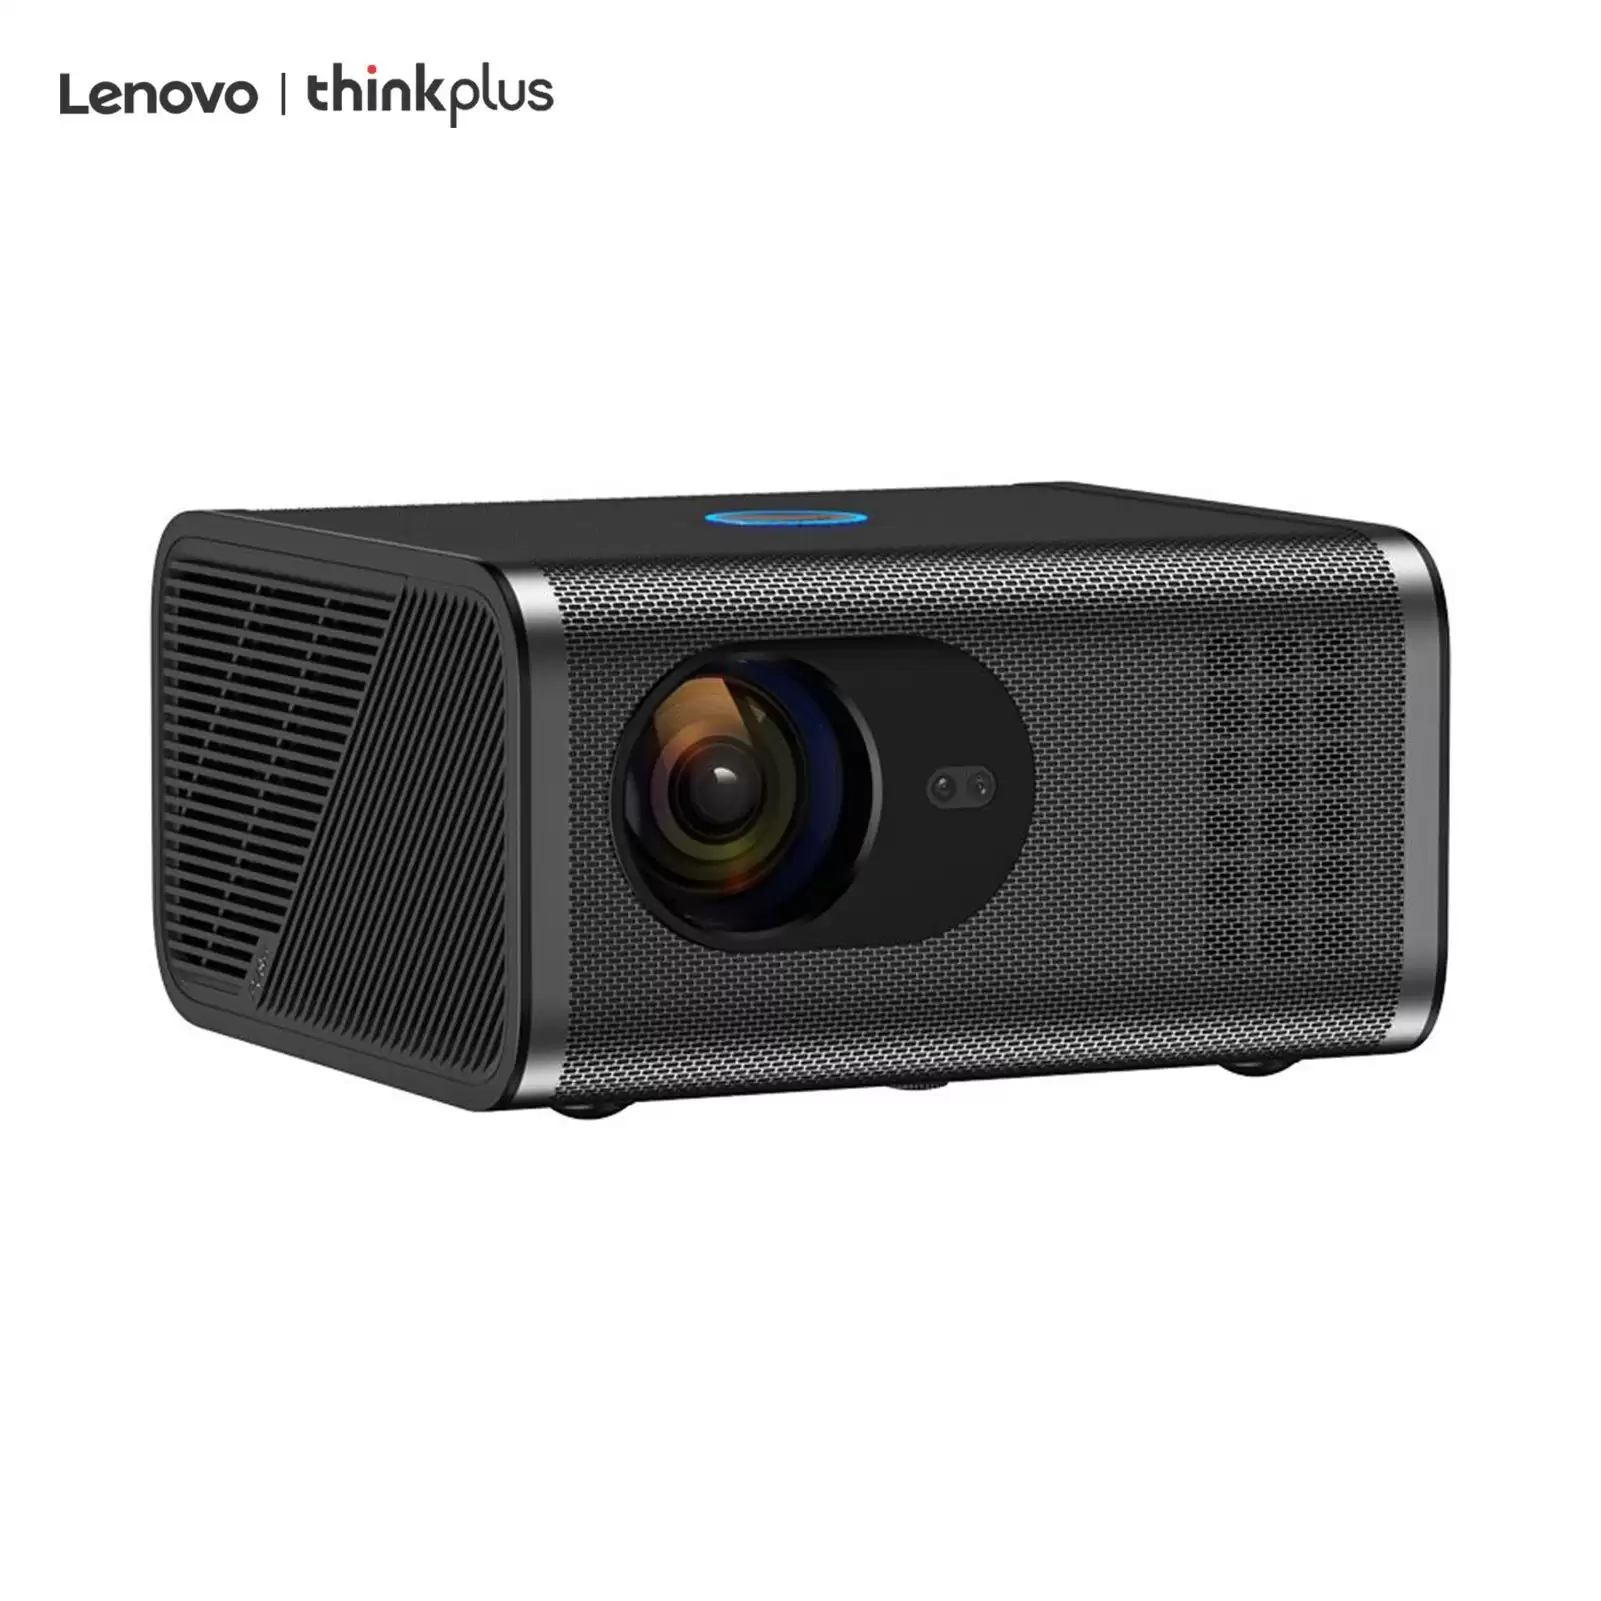 Pay Only $ 250.17 Lenovo Thinkplus Air H6 Mini Projector ,Free Shipping With This Cafago Discount Voucher